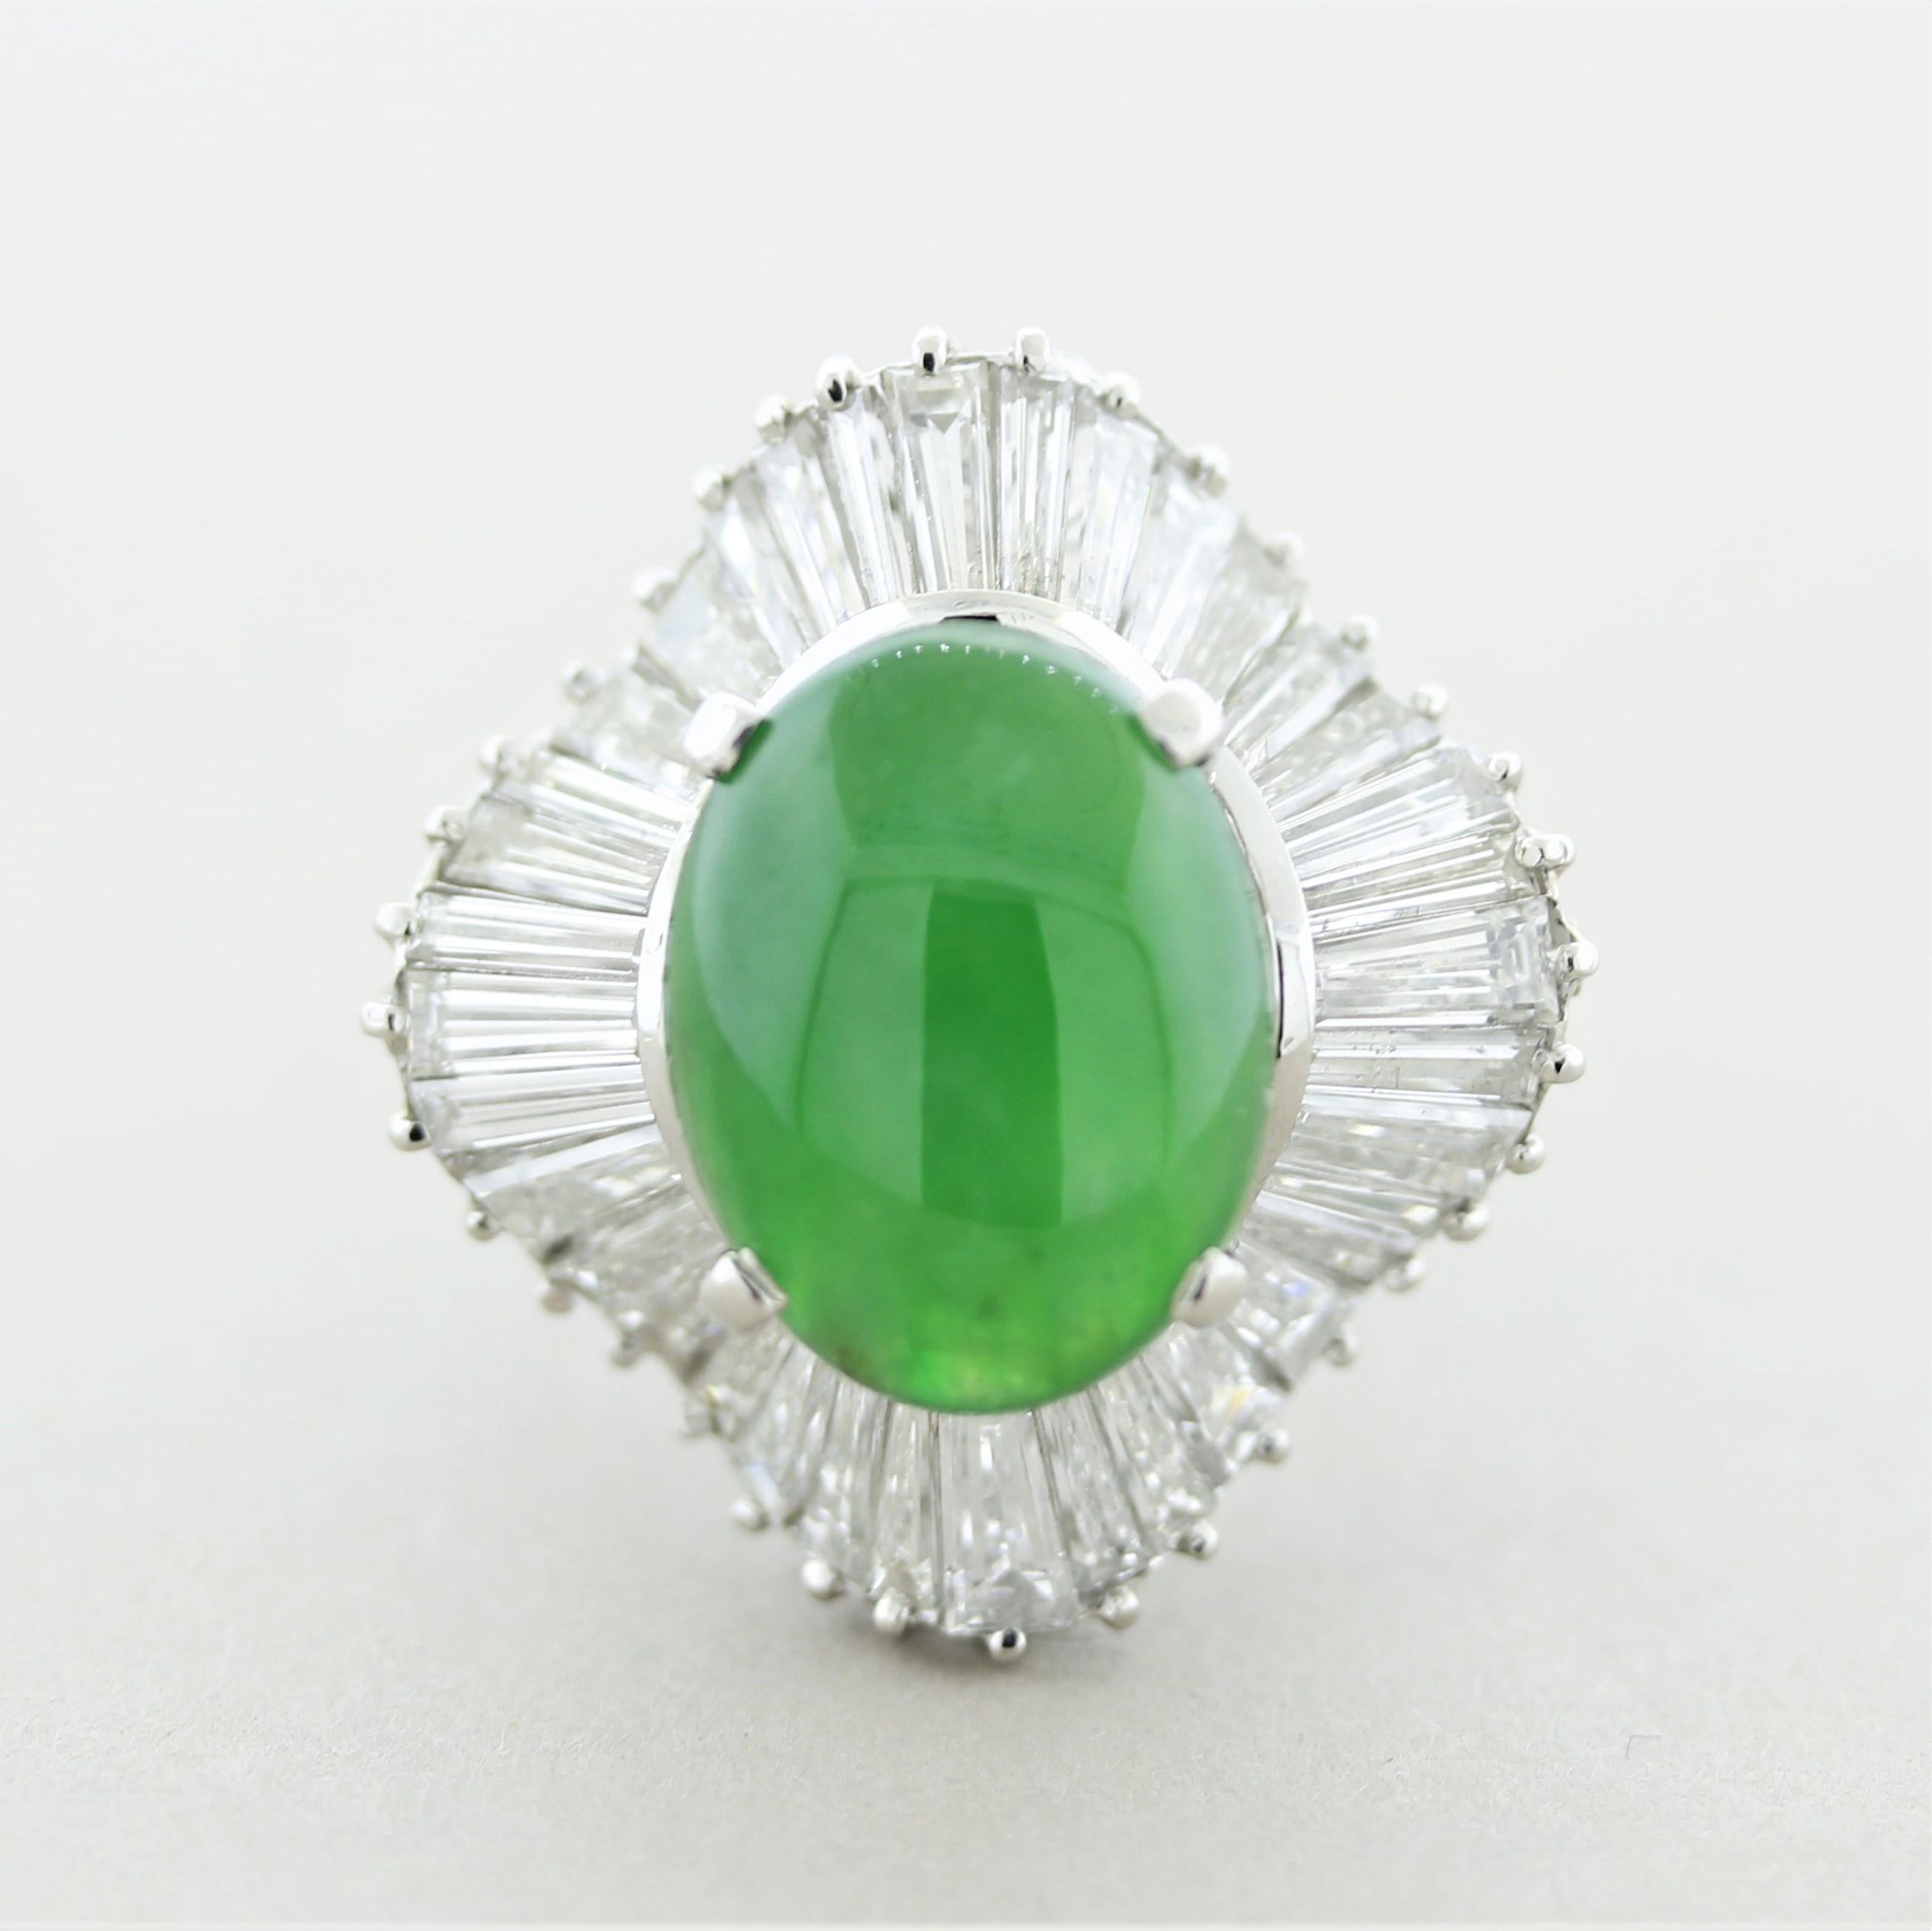 A large, bold, and impressive cocktail ring featuring a superb gem jadeite jade. It weighs 8.94 carats and has a rich vivid grass green color. Adding to the list of superlatives, the jade is completely natural with no treatment, known as “Type A.”